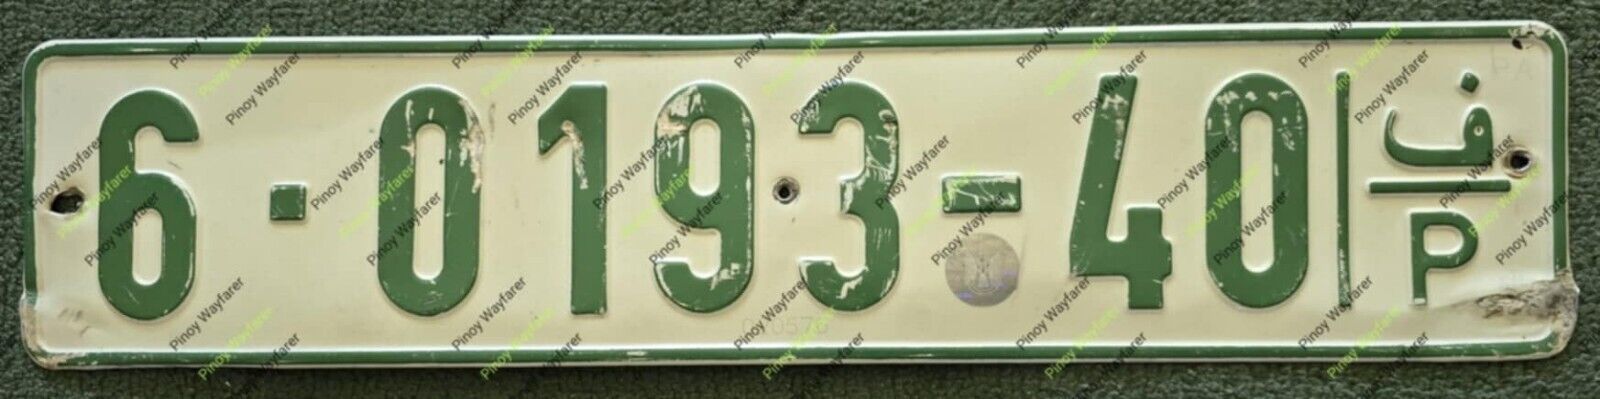 Palestine license plate PALESTINIAN number plate Arabic ASIA Middle East JERICHO